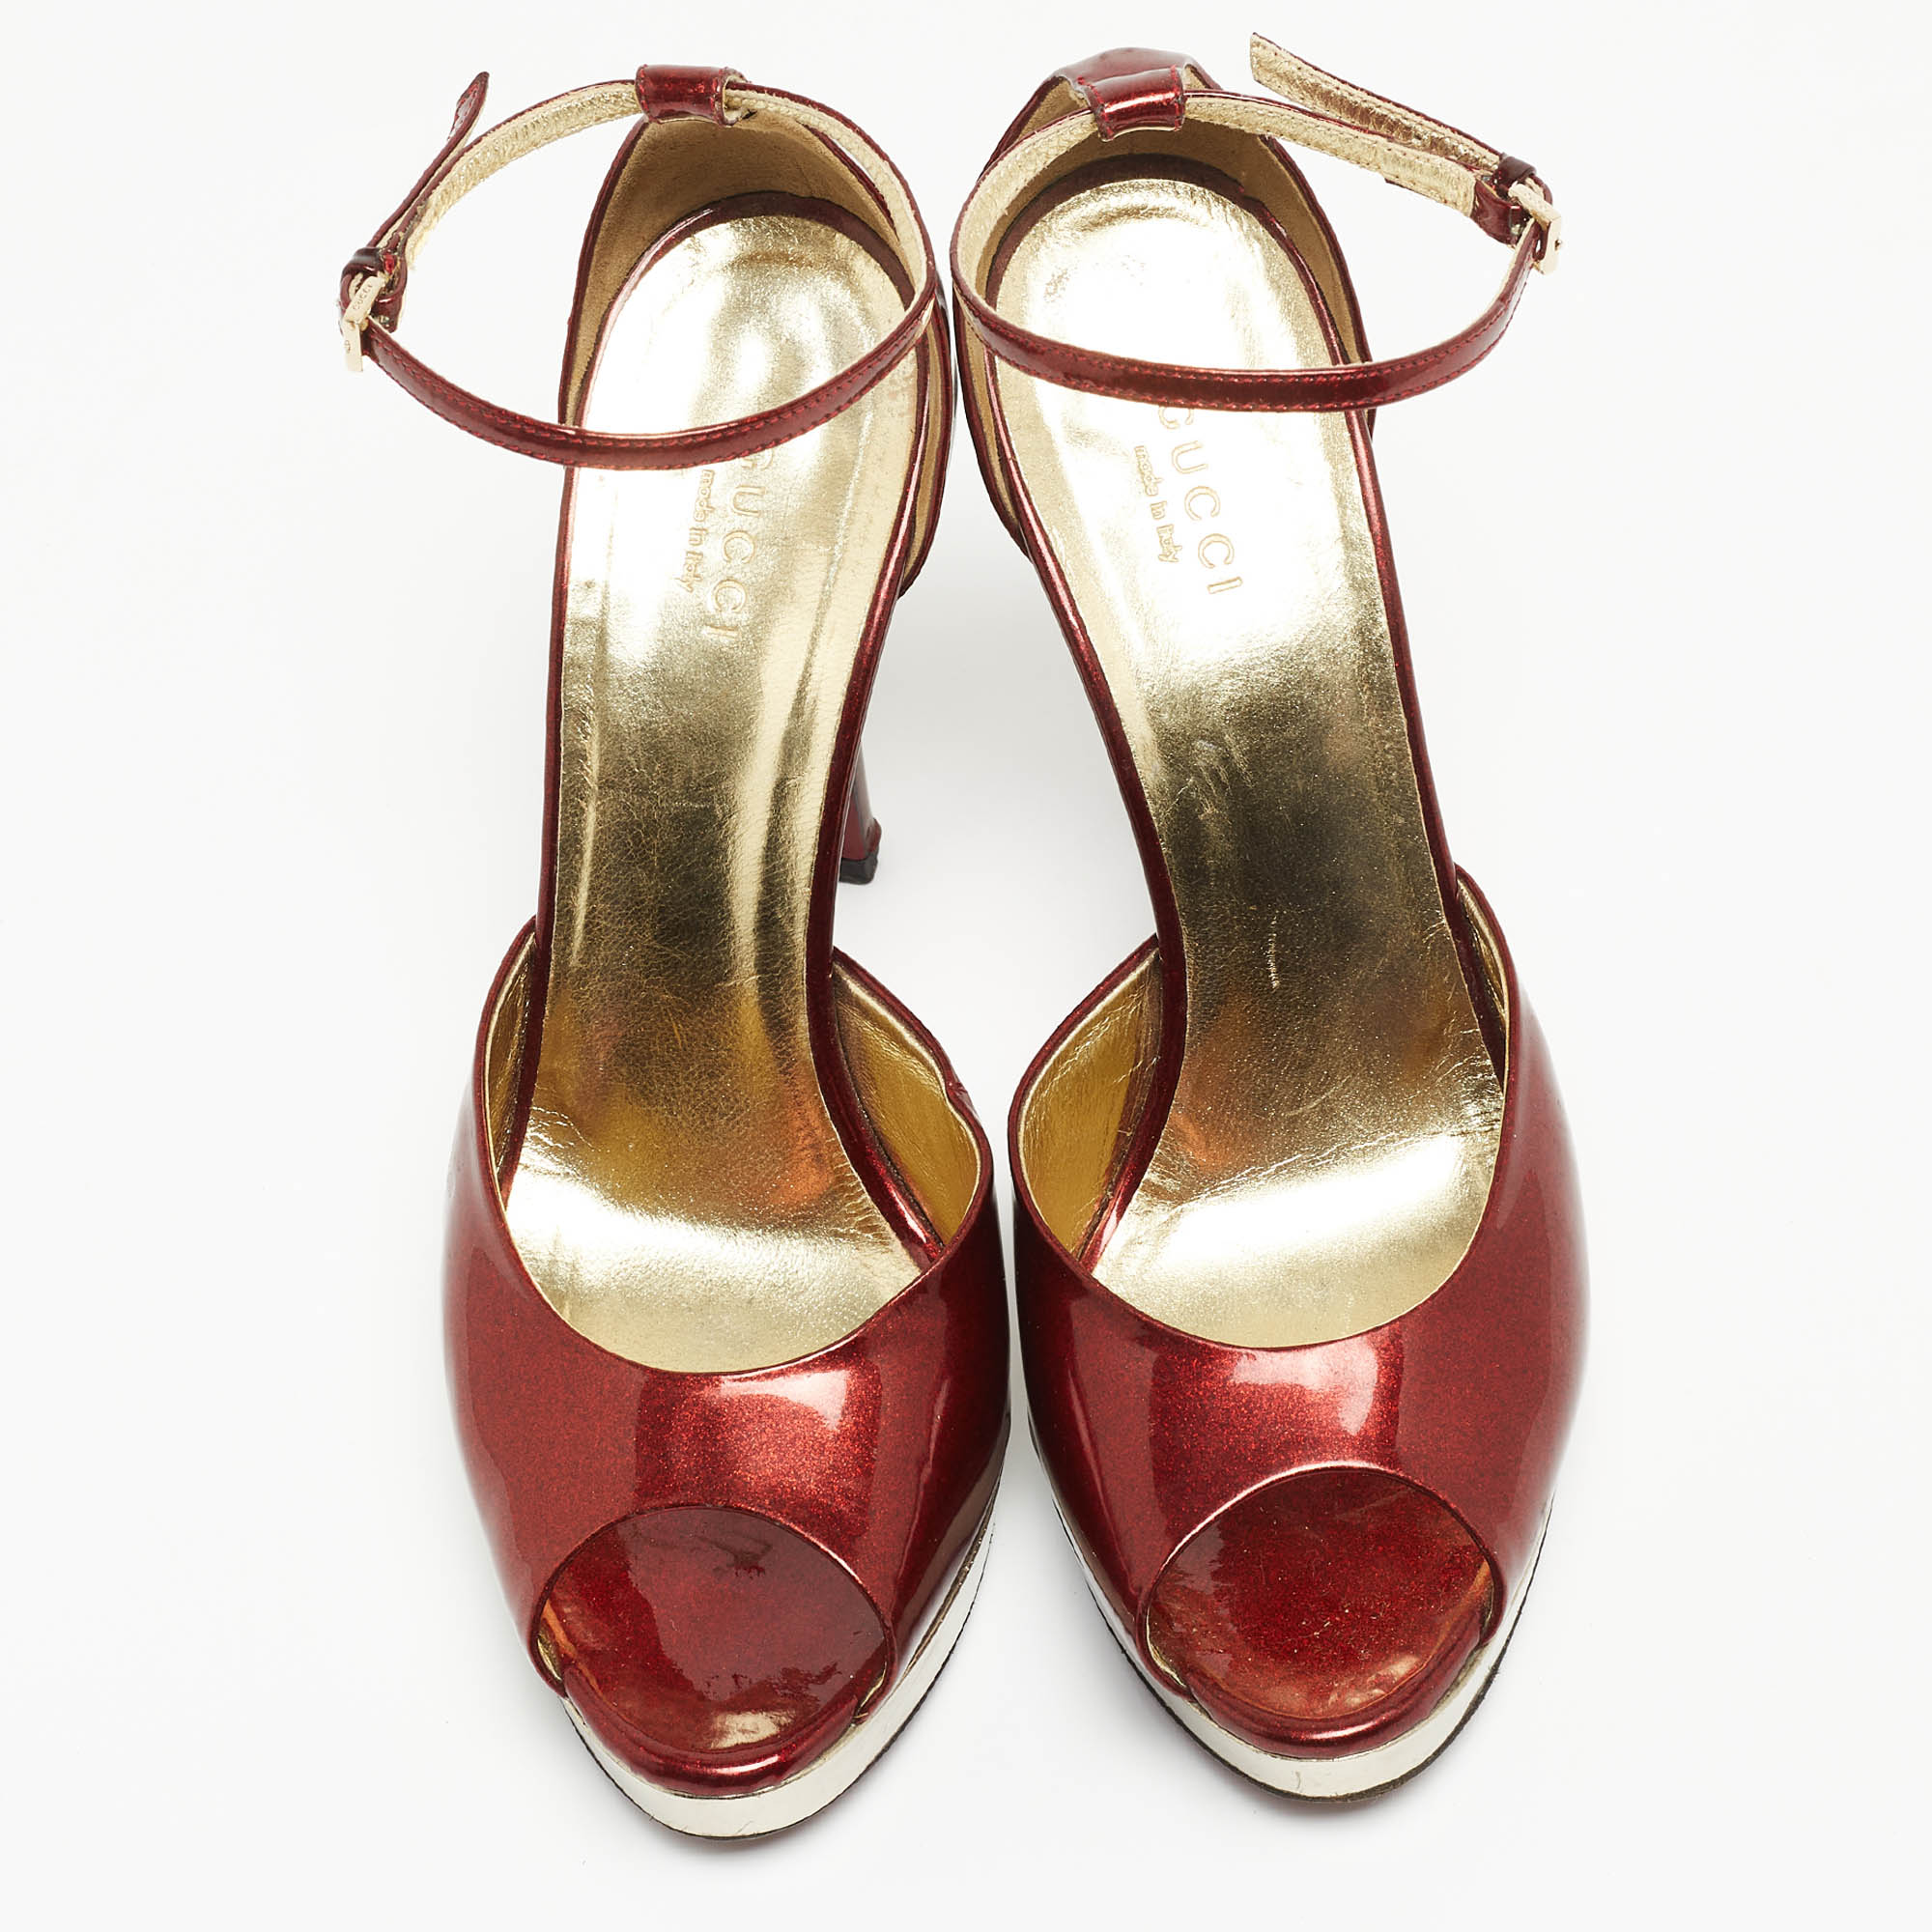 Gucci Red Patent Leather Ankle Strap Sandals Size 38.5